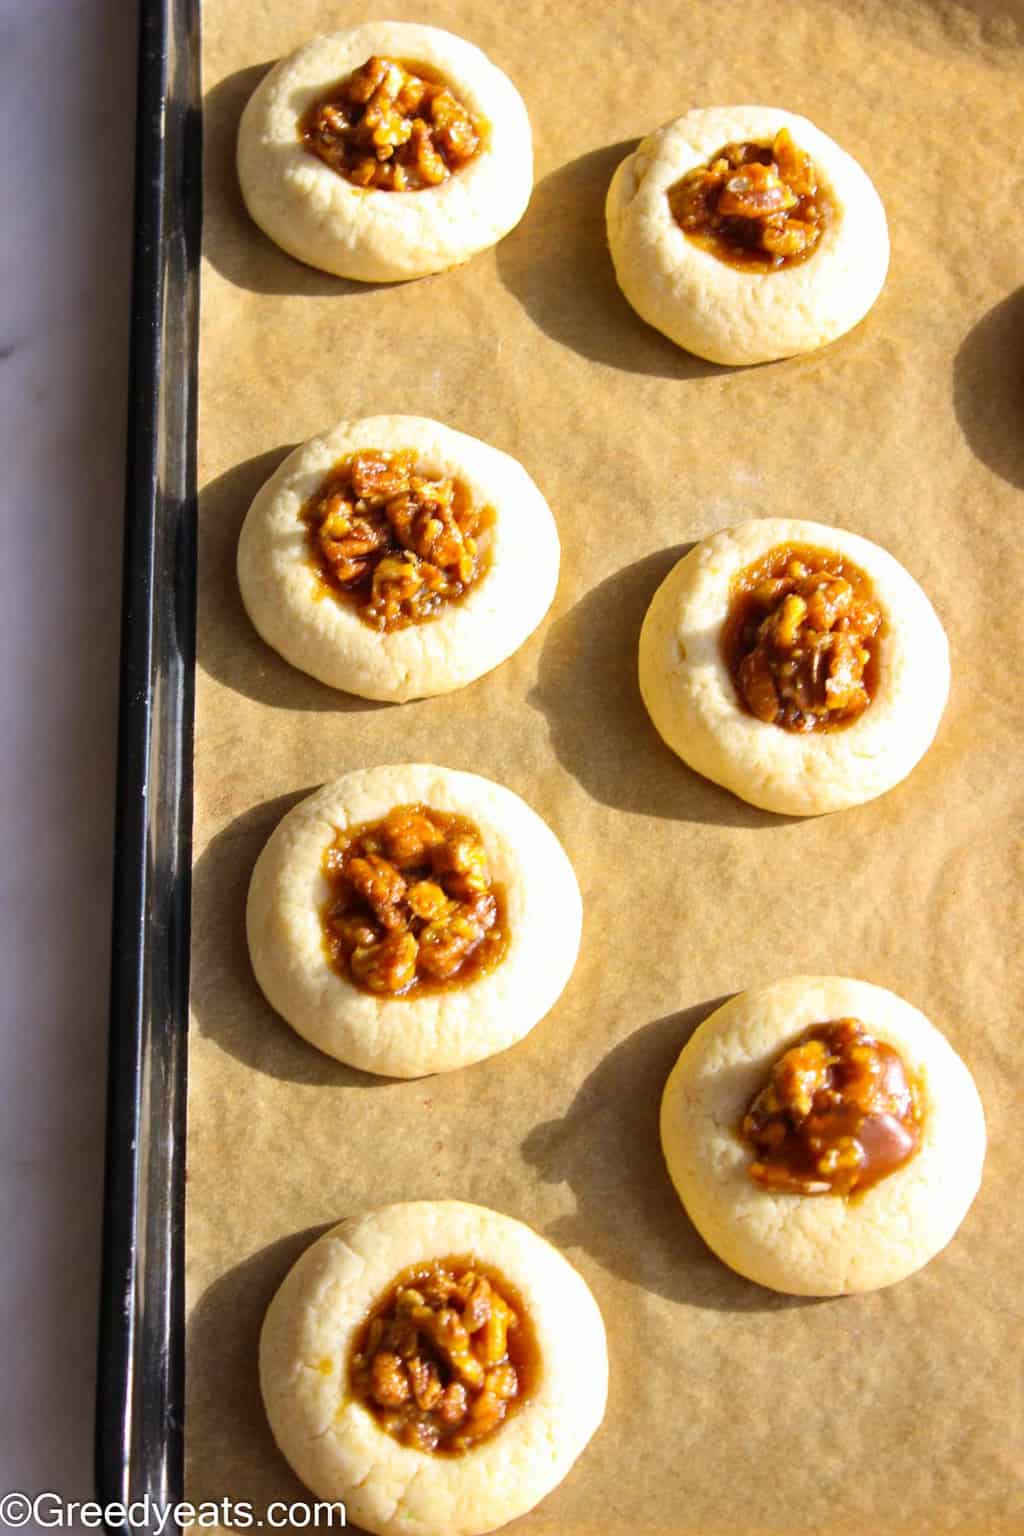 Filled with gooey and sticky pecan pie filling my pecan pie cookies recipe will be a family favorite in the first try!